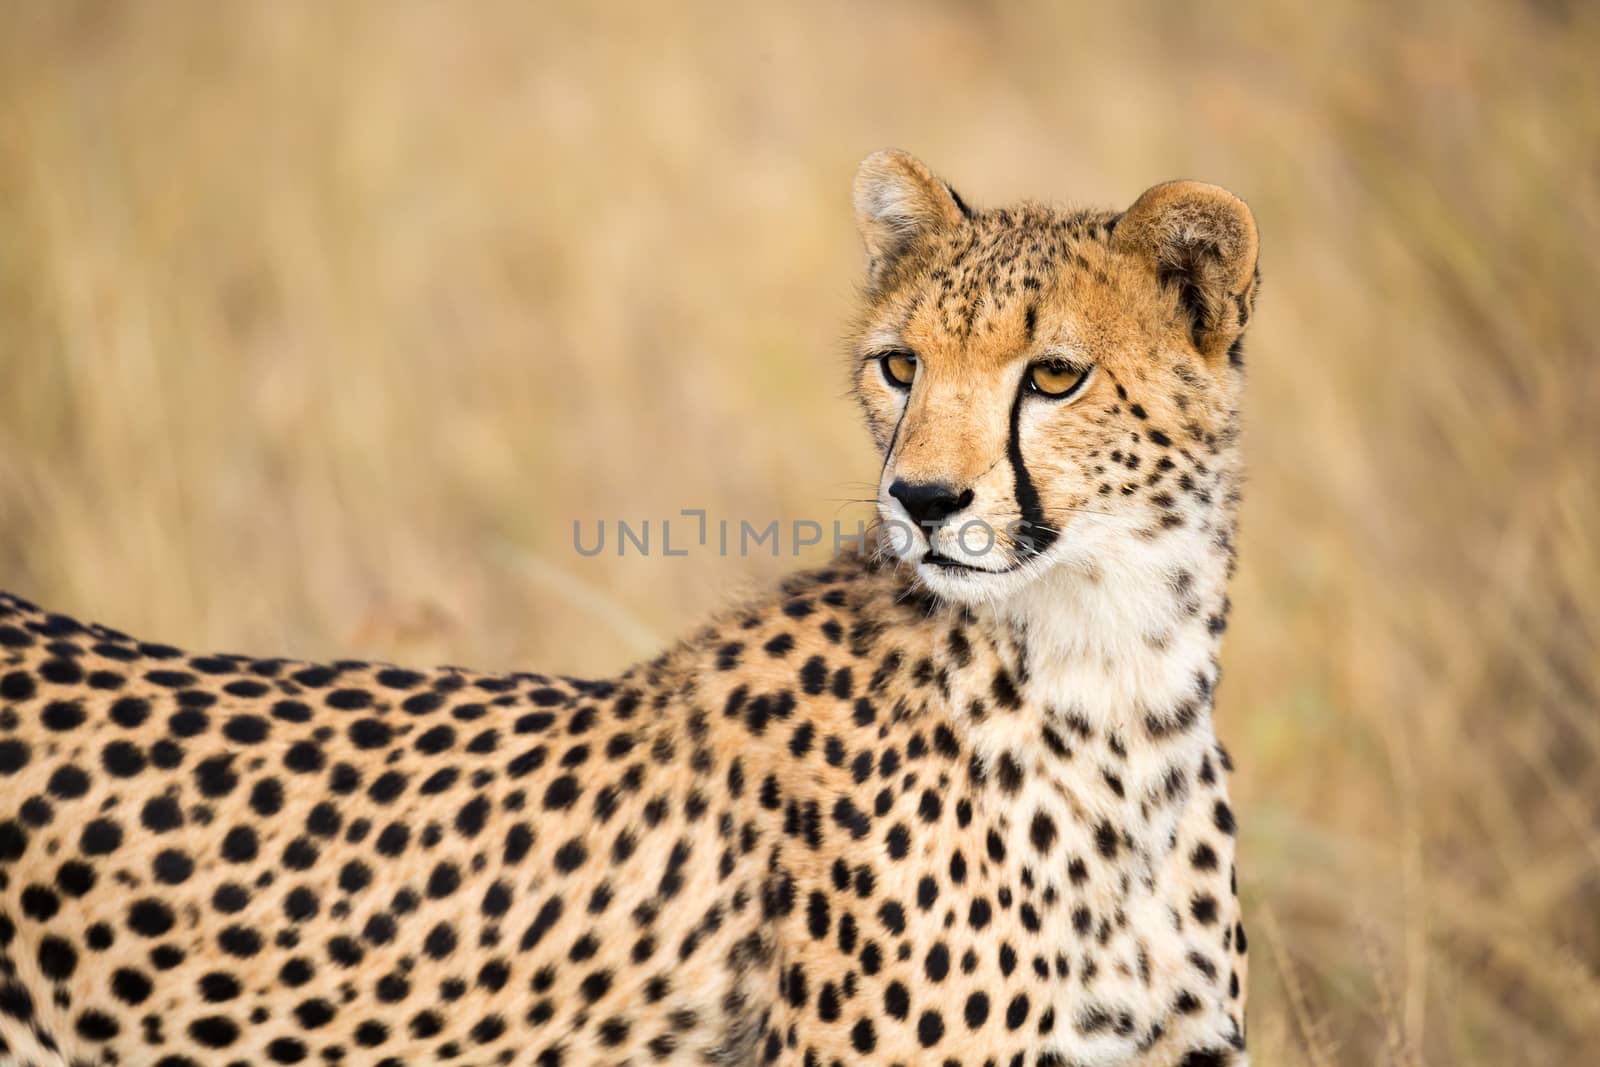 A portrait of a cheetah in the grass landscape by 25ehaag6